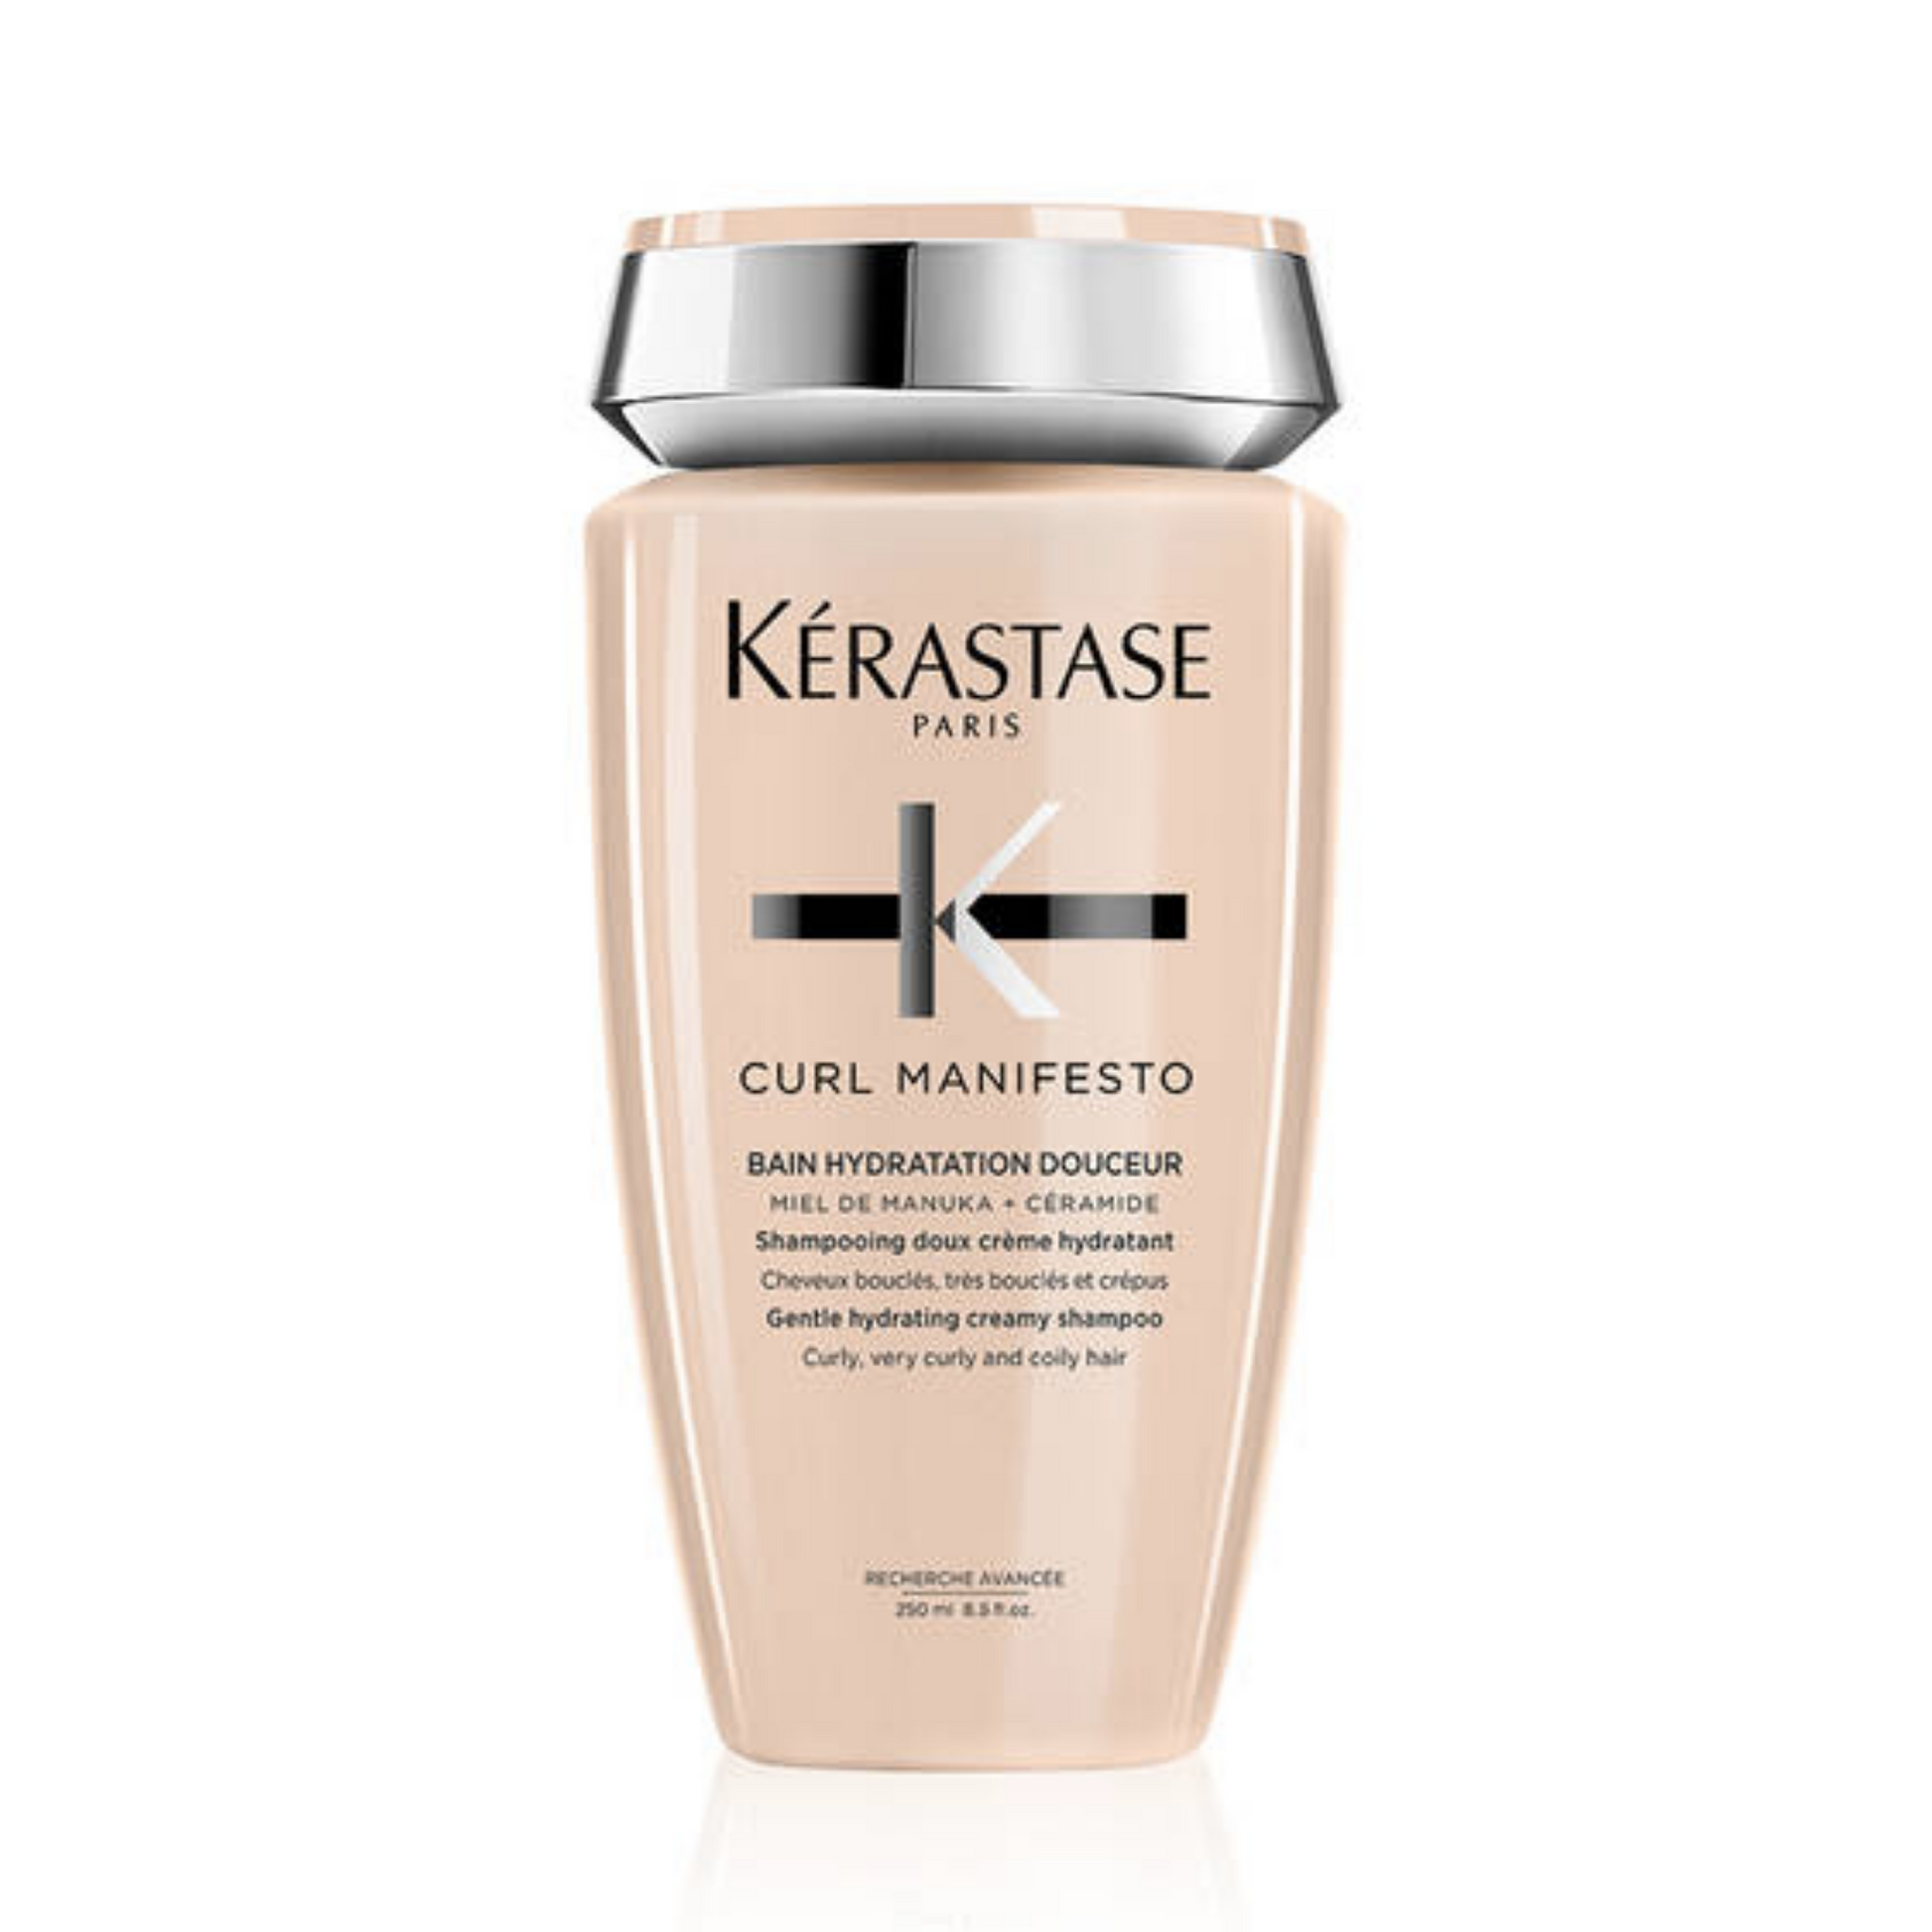 Kérastase Curl Manifesto Shampoo 250ml Gentle hydrating creamy shampoo for curly, very curly and coily hair. Gently cleanses scalp and hair without removing natural oils and intensely moisturizes curls.